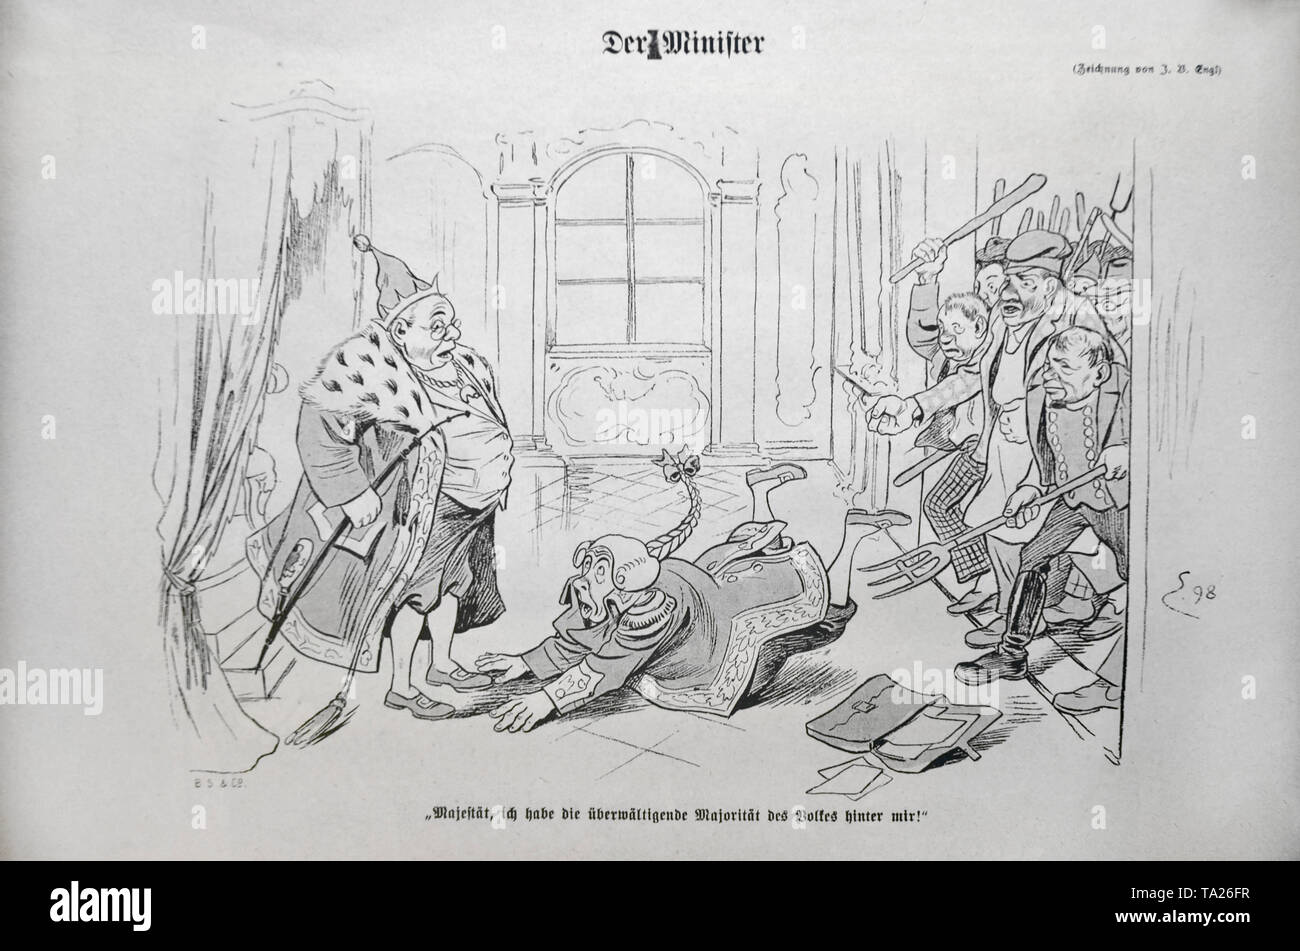 The drawing 'Der Minister'(The Minister) by Josef Benedikt Eng. Cartoon from the satirical magazine 'Simplicissimus', Volume 3, Issue no. 37, p. 294. A minister falls before the king. Village people chase him in the background. 'Your Majesty, I have the overwhelming majority of the village behind me!' Stock Photo